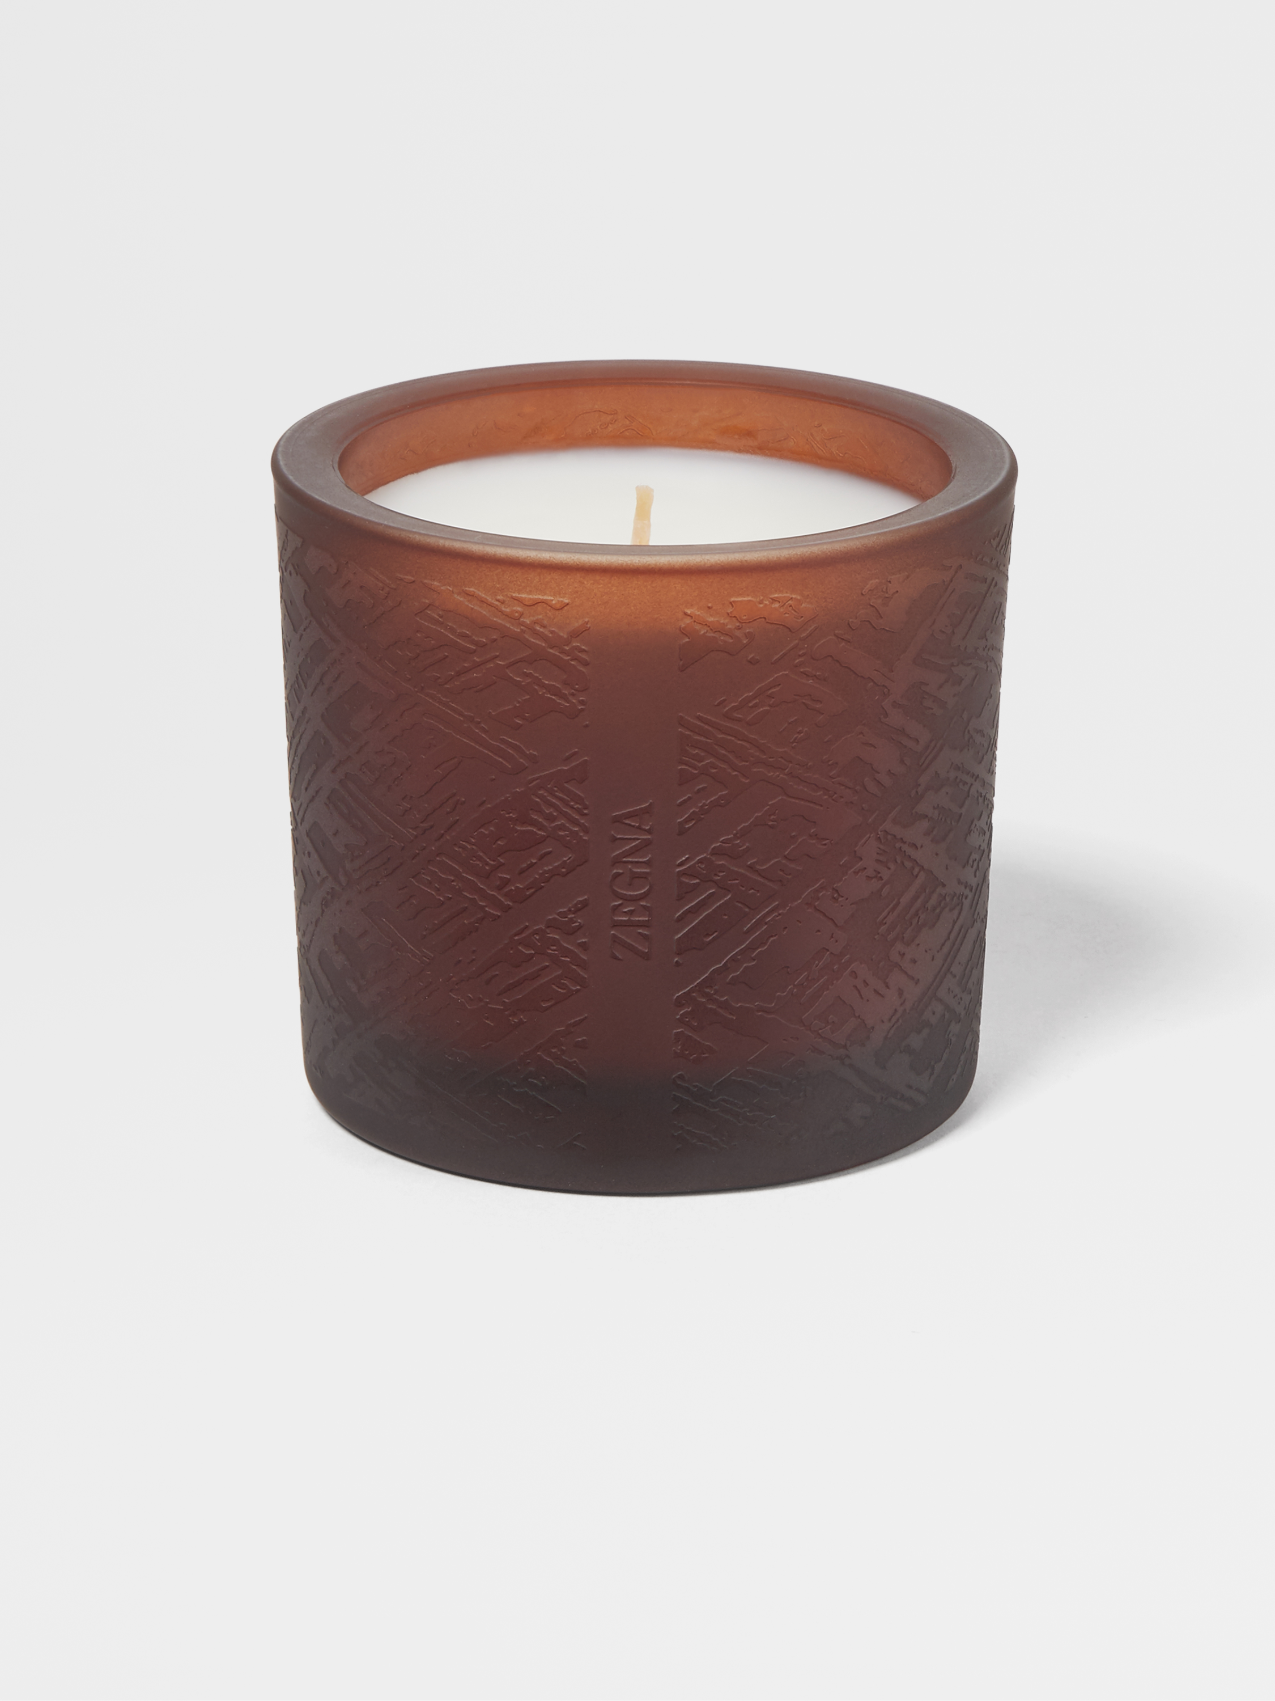 Zegna Cashmere Candle